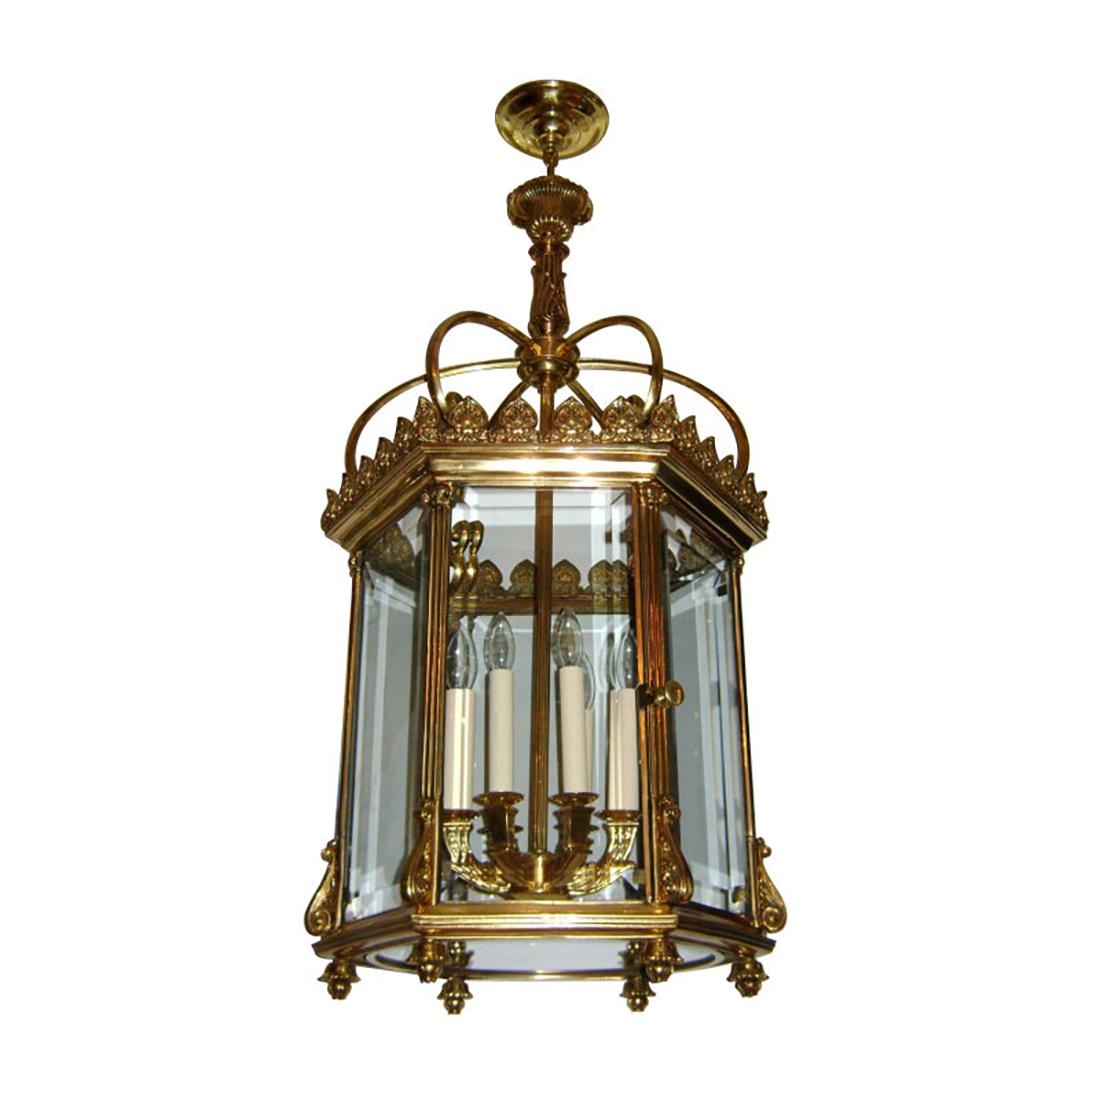 A set of 4 circa 1940’s English Neoclassic style gilt bronze lantern with an interior six-light cluster. Sold individually.

Measurements:
Minimum drop:  40″
Diameter:  19″